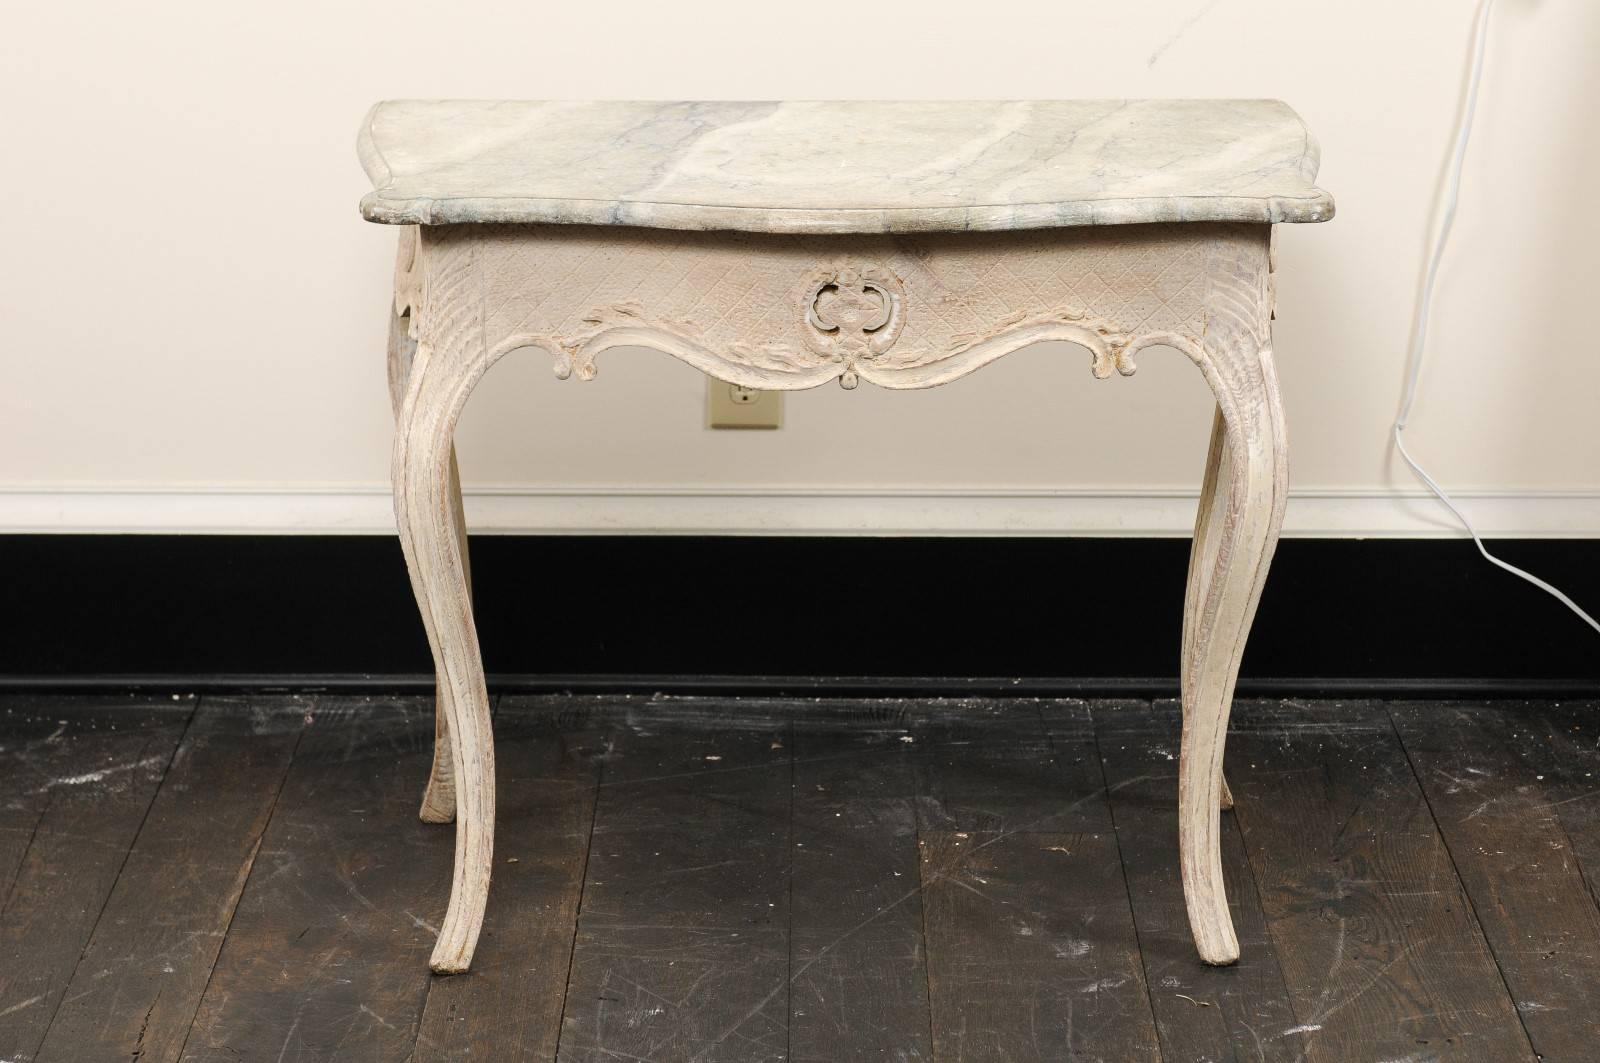 An 18th century Swedish wooden side table. This exquisite antique Swedish side table features a hand-painted faux-marble top, and scalloped apron which has been carved with a fine cross-cross and dotted pattern. This table has a pierced carving at